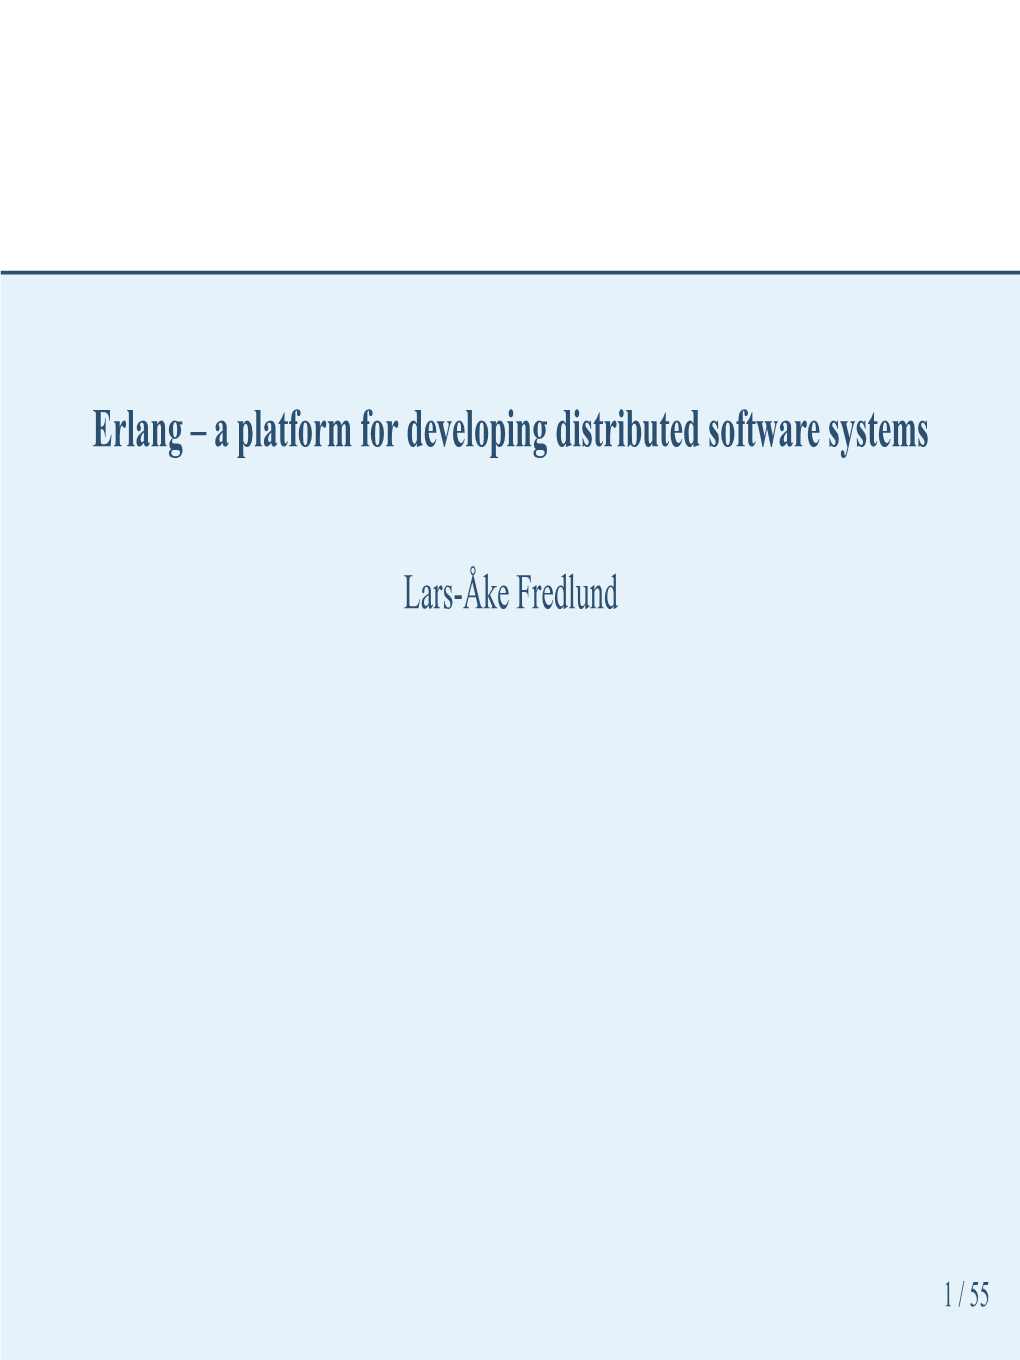 Erlang – a Platform for Developing Distributed Software Systems